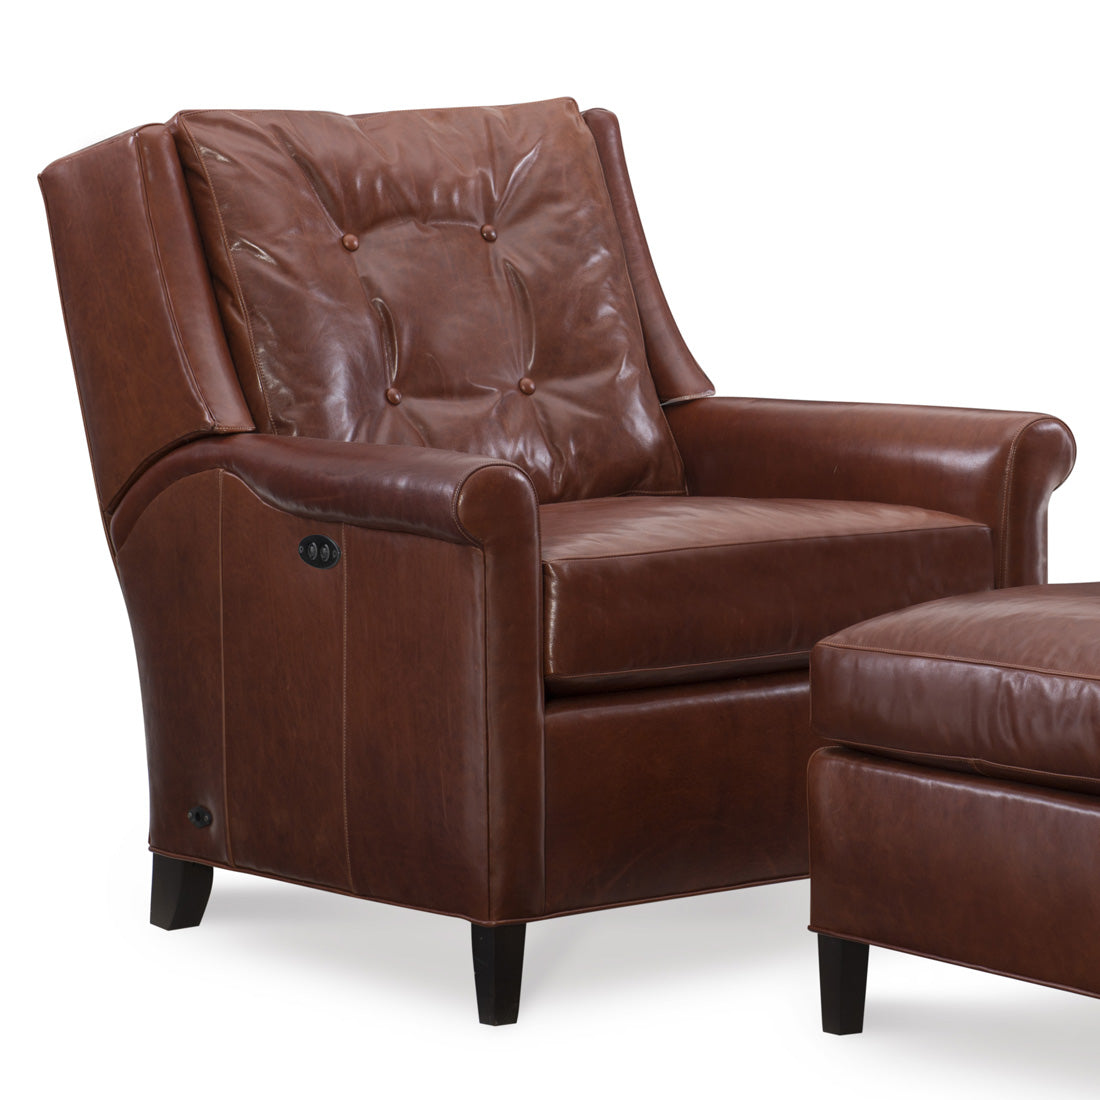 Fallon Leather Tilt Back Chair Mont Blanc Chianti leather by Wesley Hall - close up